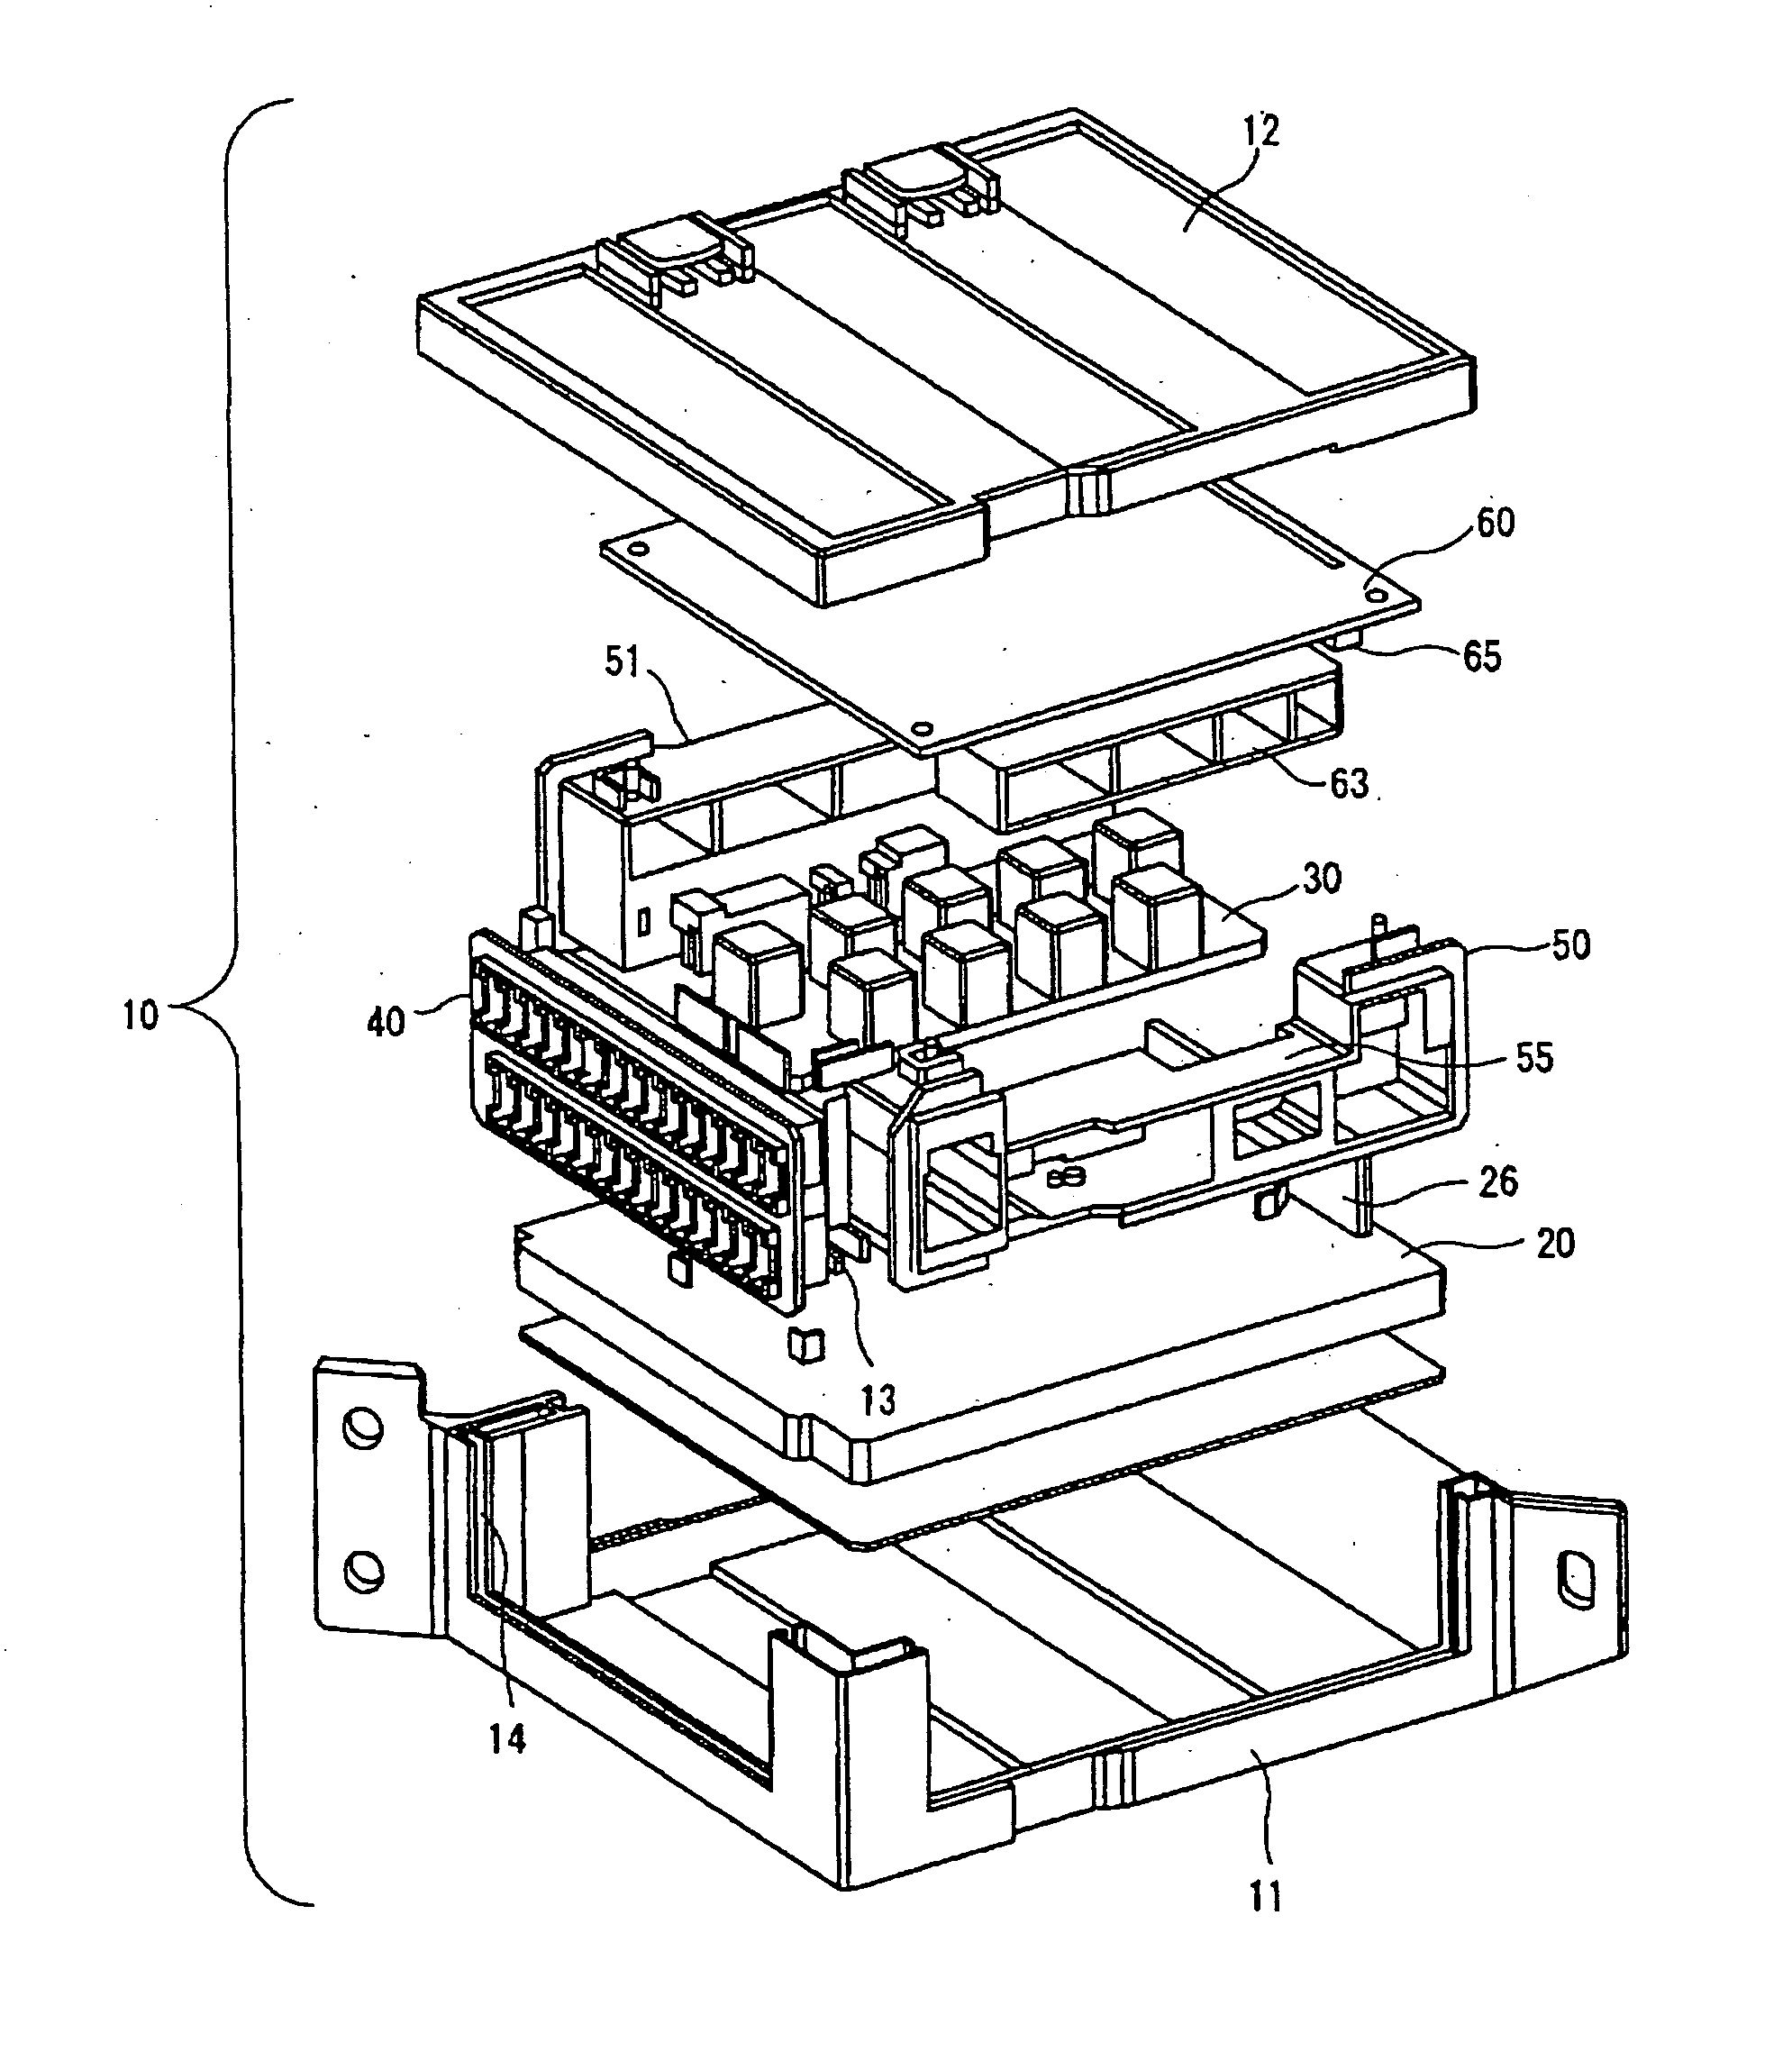 Automotive relay and electrical connector box